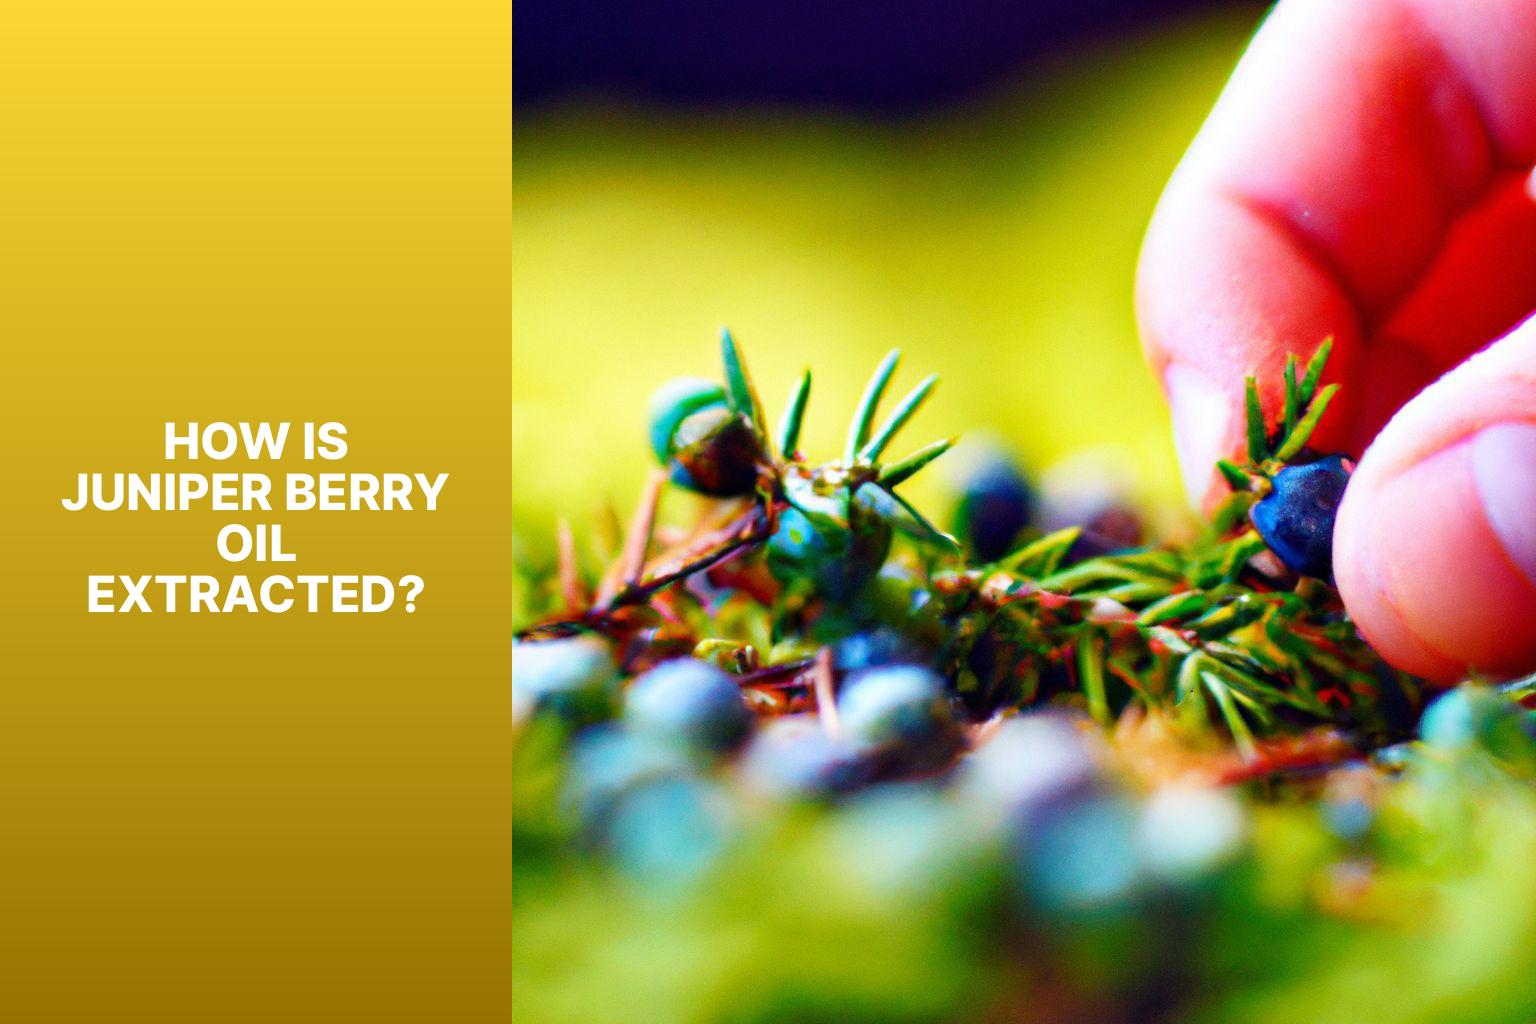 How is Juniper Berry Oil Extracted? - Skin Benefits of Juniper Berry Oil: Discover how juniper berry oil can benefit the skin by addressing issues like acne, inflammation, and more. 